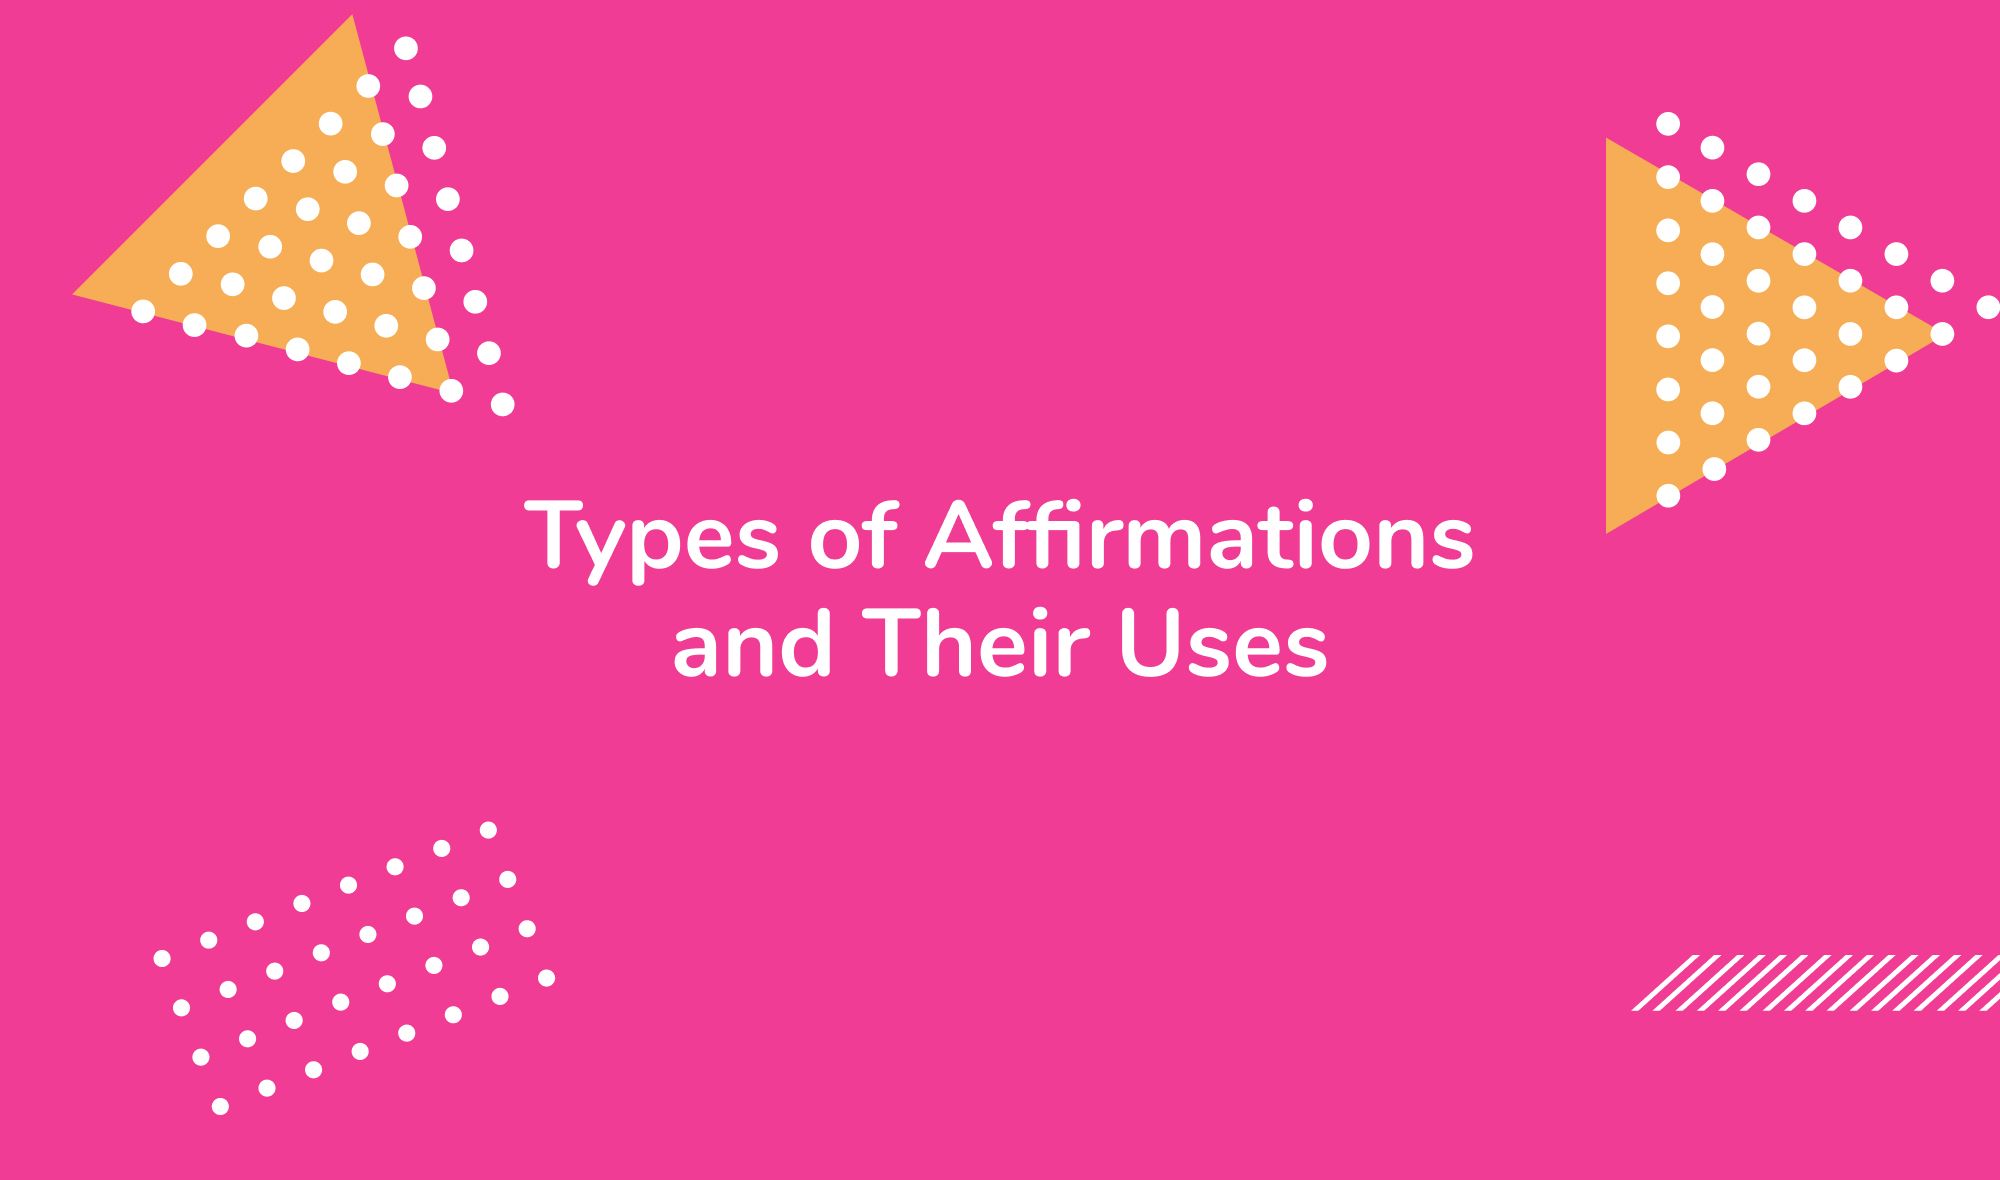 Types of Affirmations and Their Uses